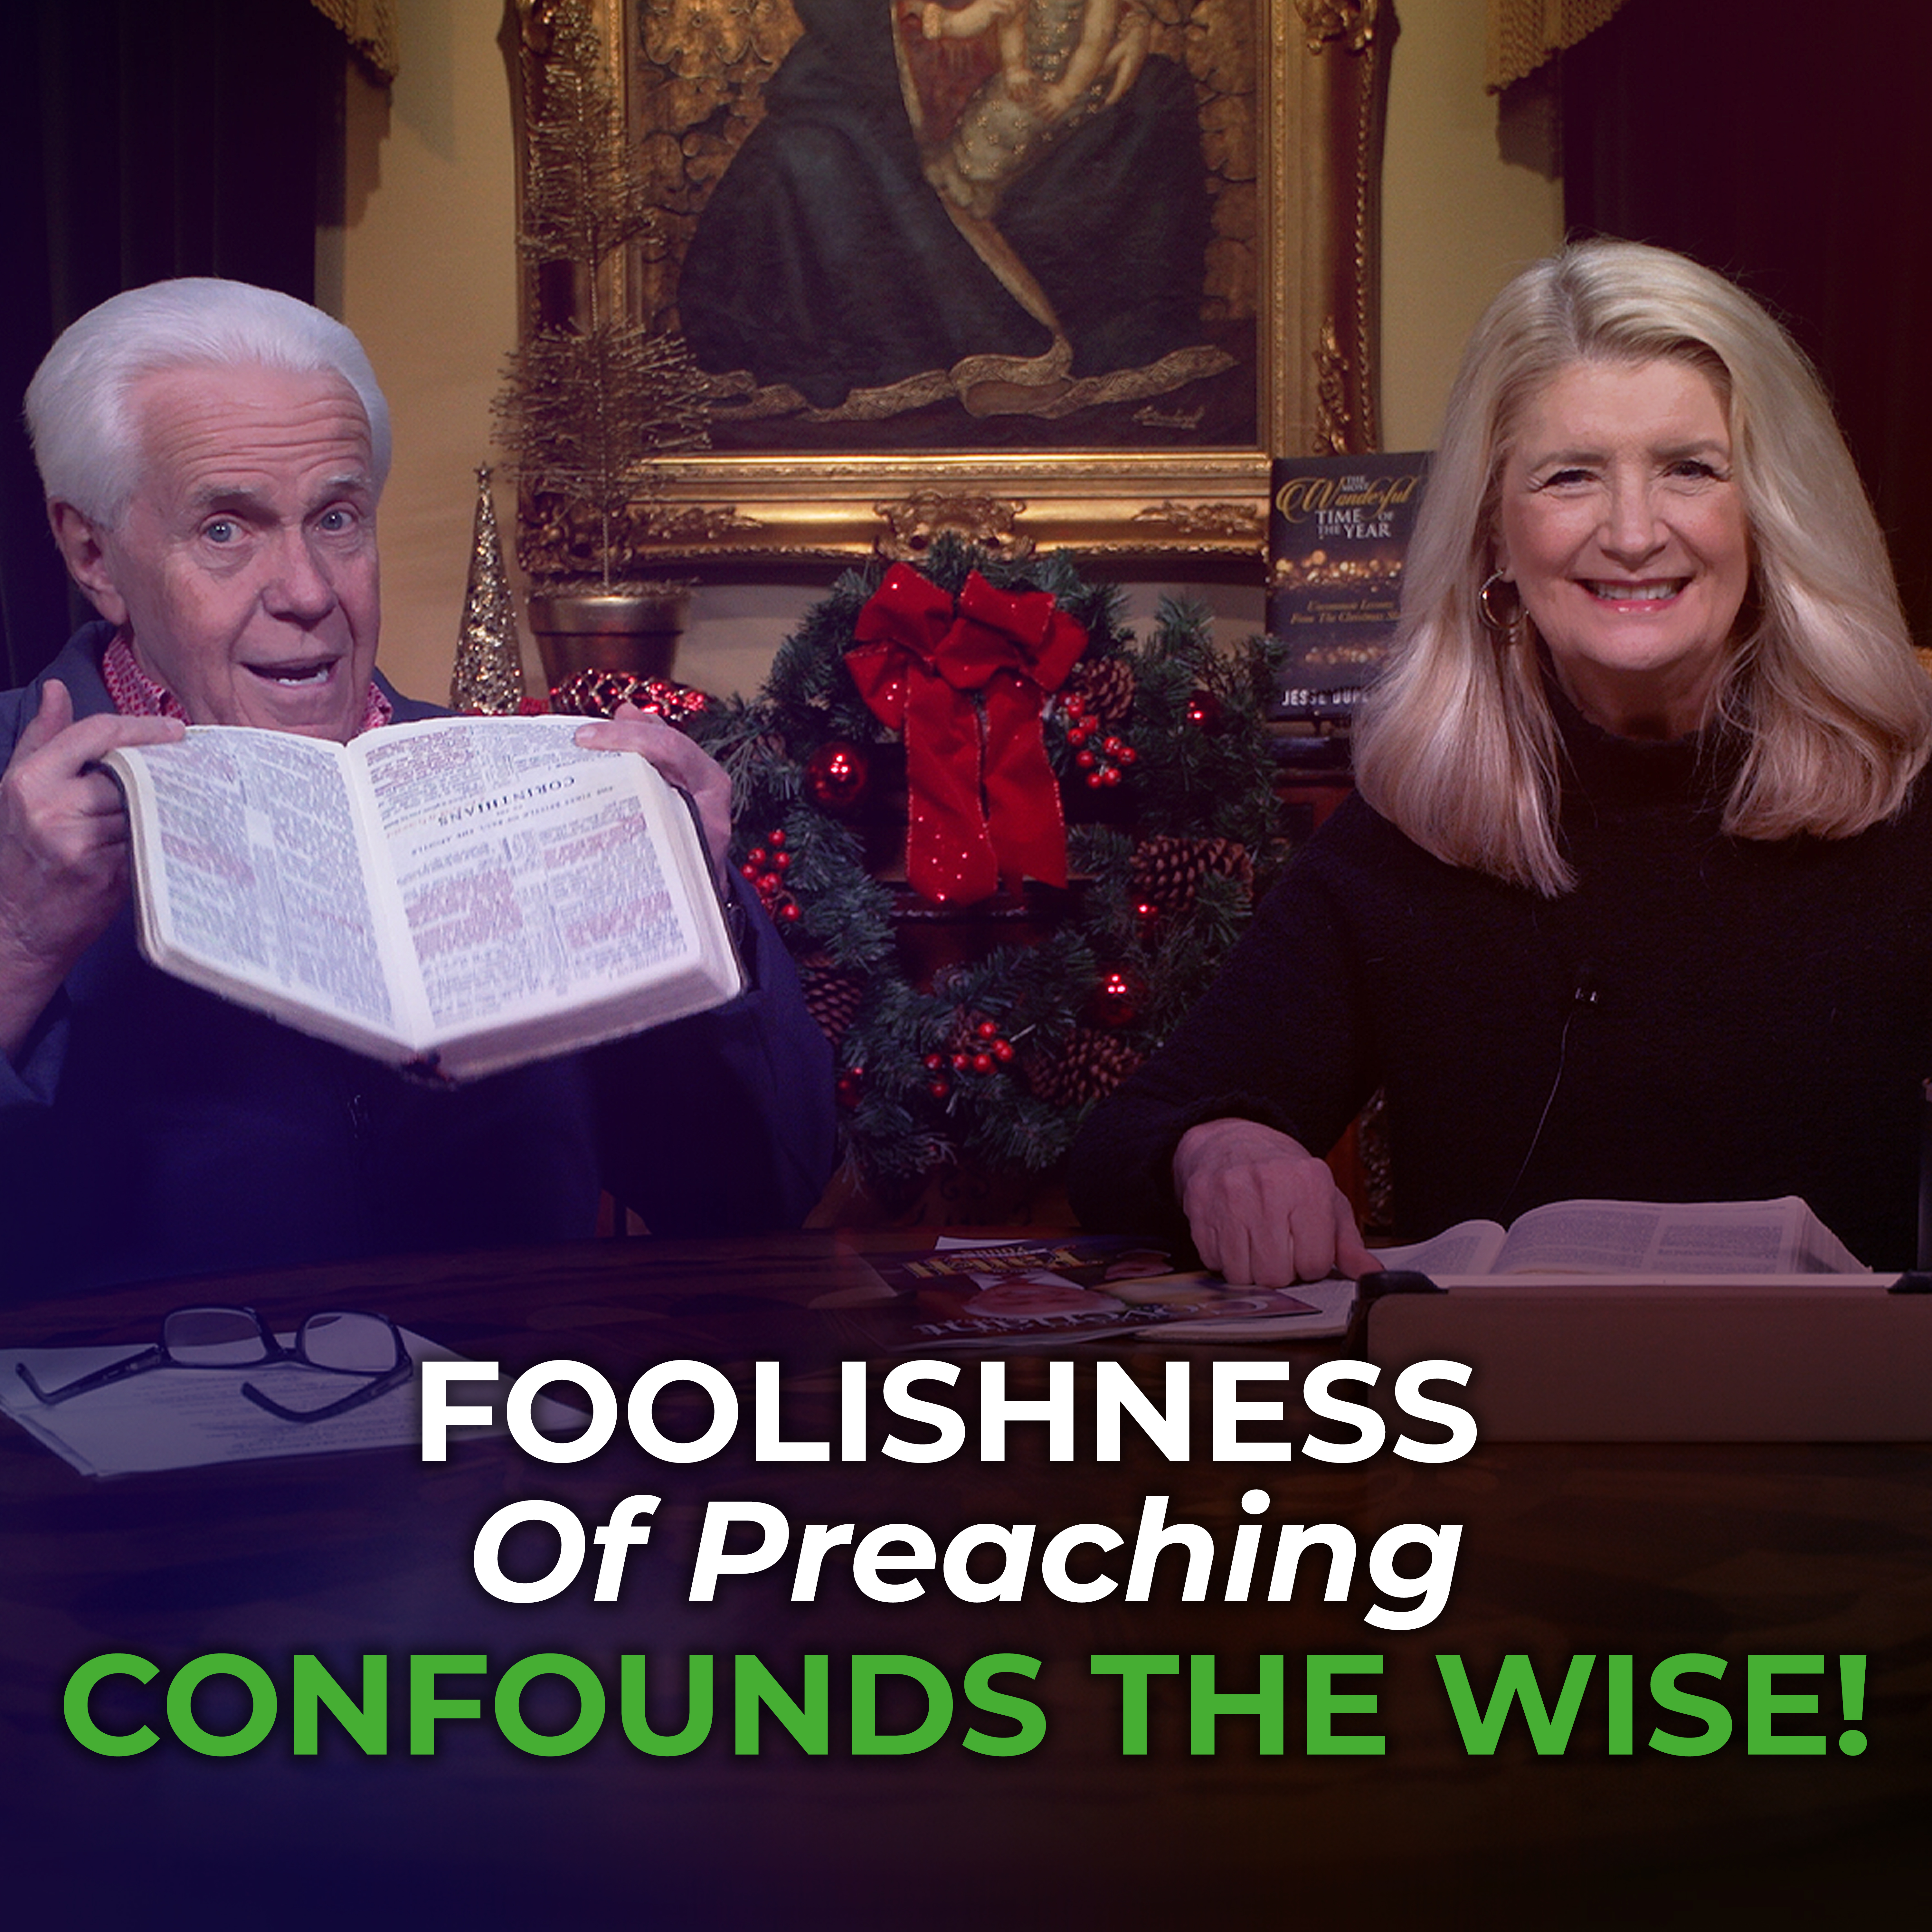 Foolishness Of Preaching Confounds The Wise!